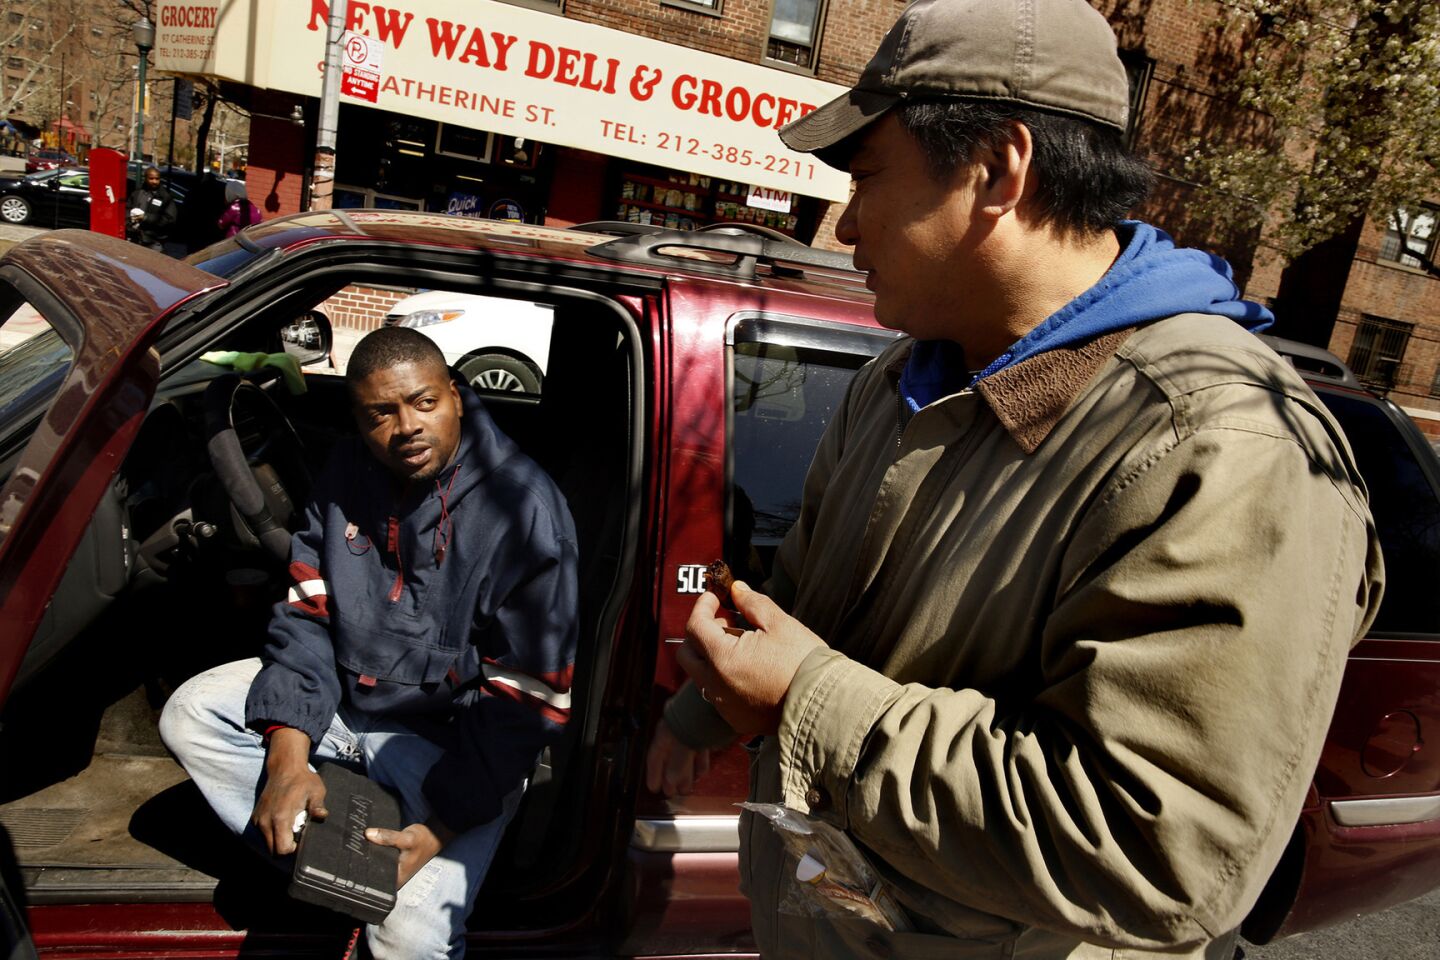 Kenneth Eng offers Joel Mangal, left, adviceabout his car's muffleron the edge of New York's Chinatown.